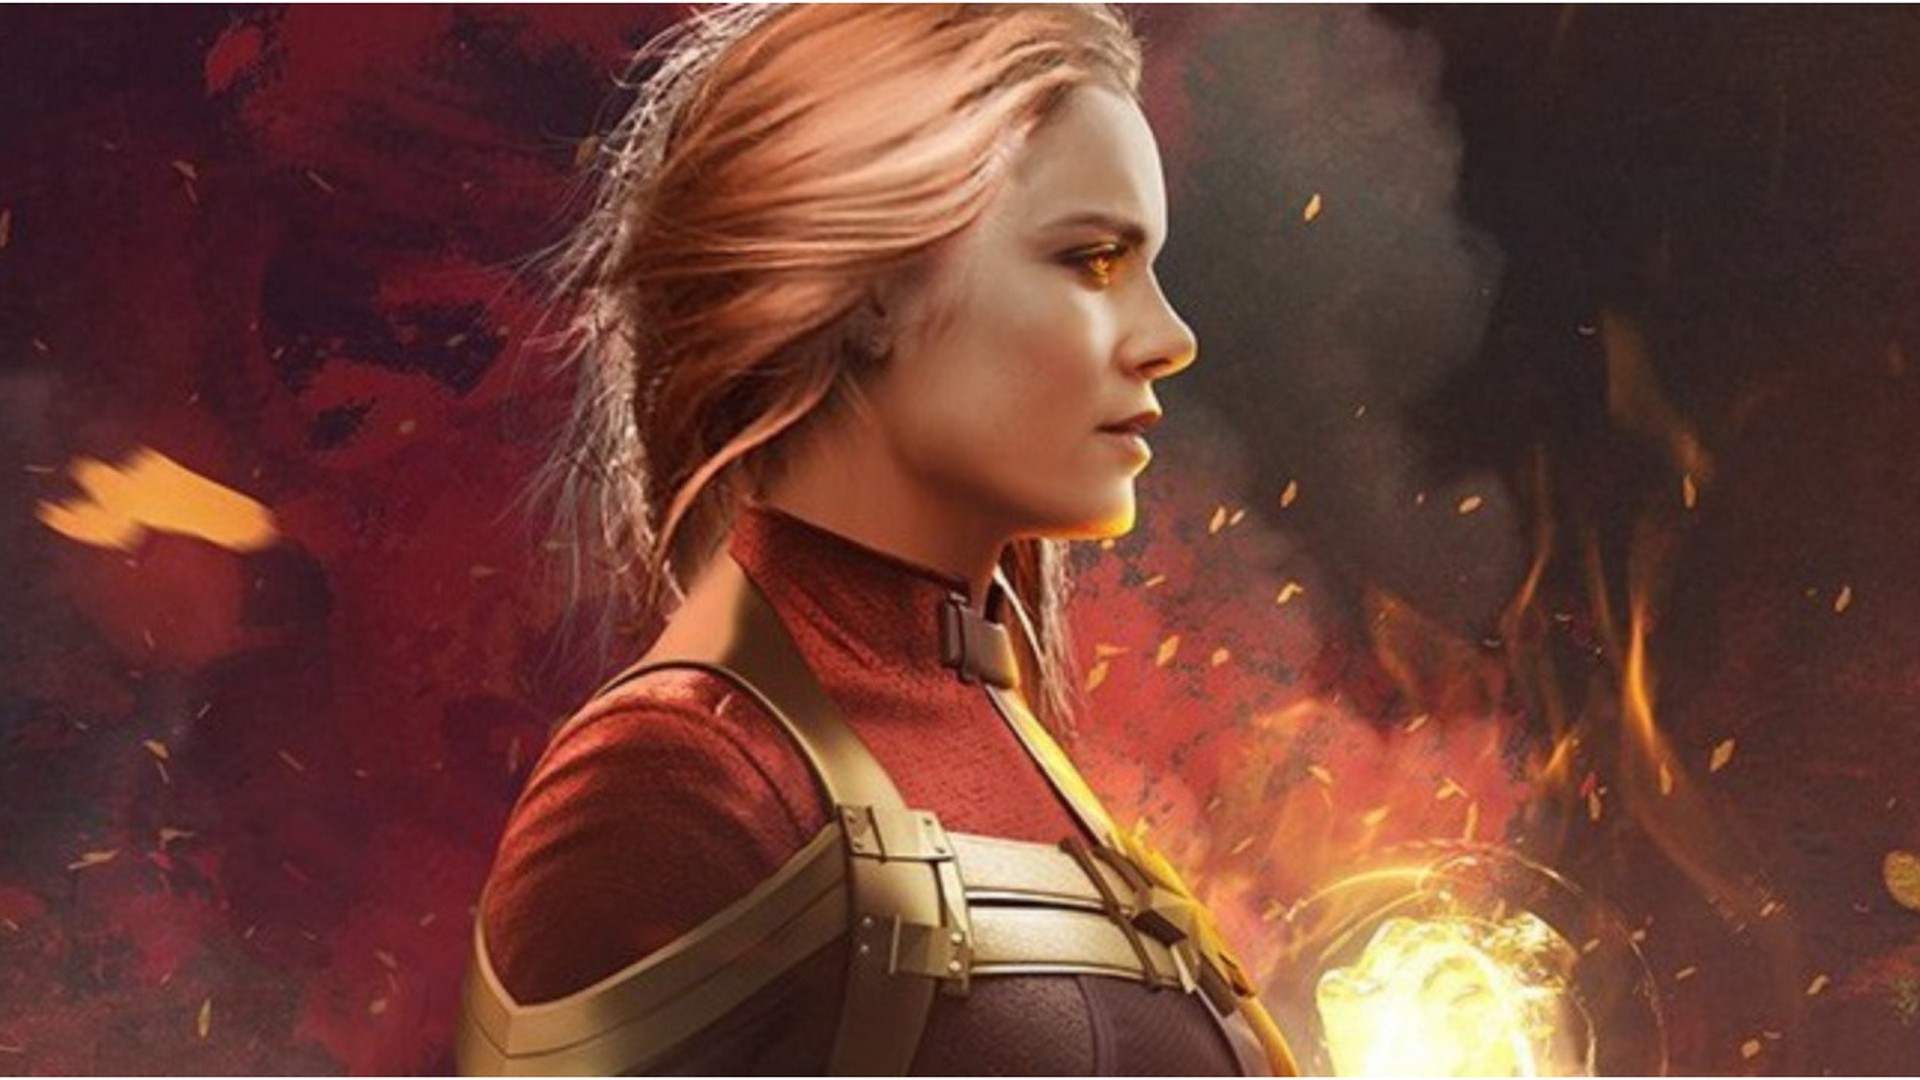 Captain Marvel Animated Wallpaper For Desktop with high-resolution 1920x1080 pixel. You can use this poster wallpaper for your Desktop Computers, Mac Screensavers, Windows Backgrounds, iPhone Wallpapers, Tablet or Android Lock screen and another Mobile device